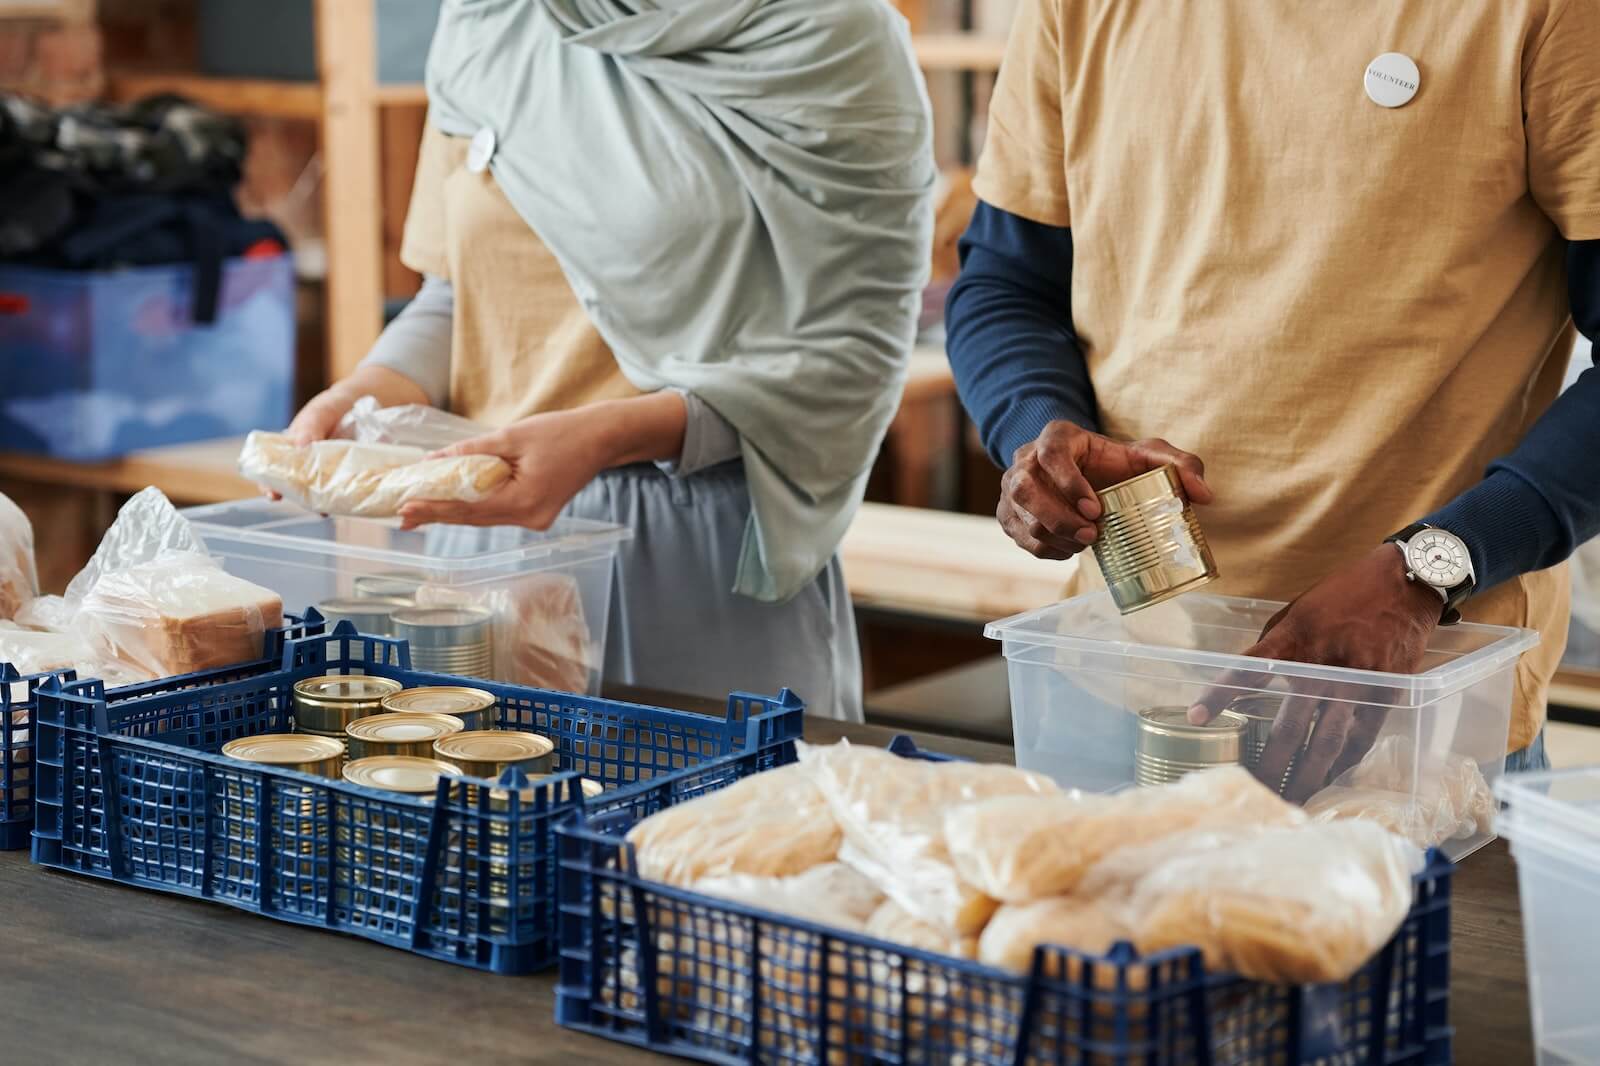 7 Southern “Food Rescue” Organizations You Need to Know About